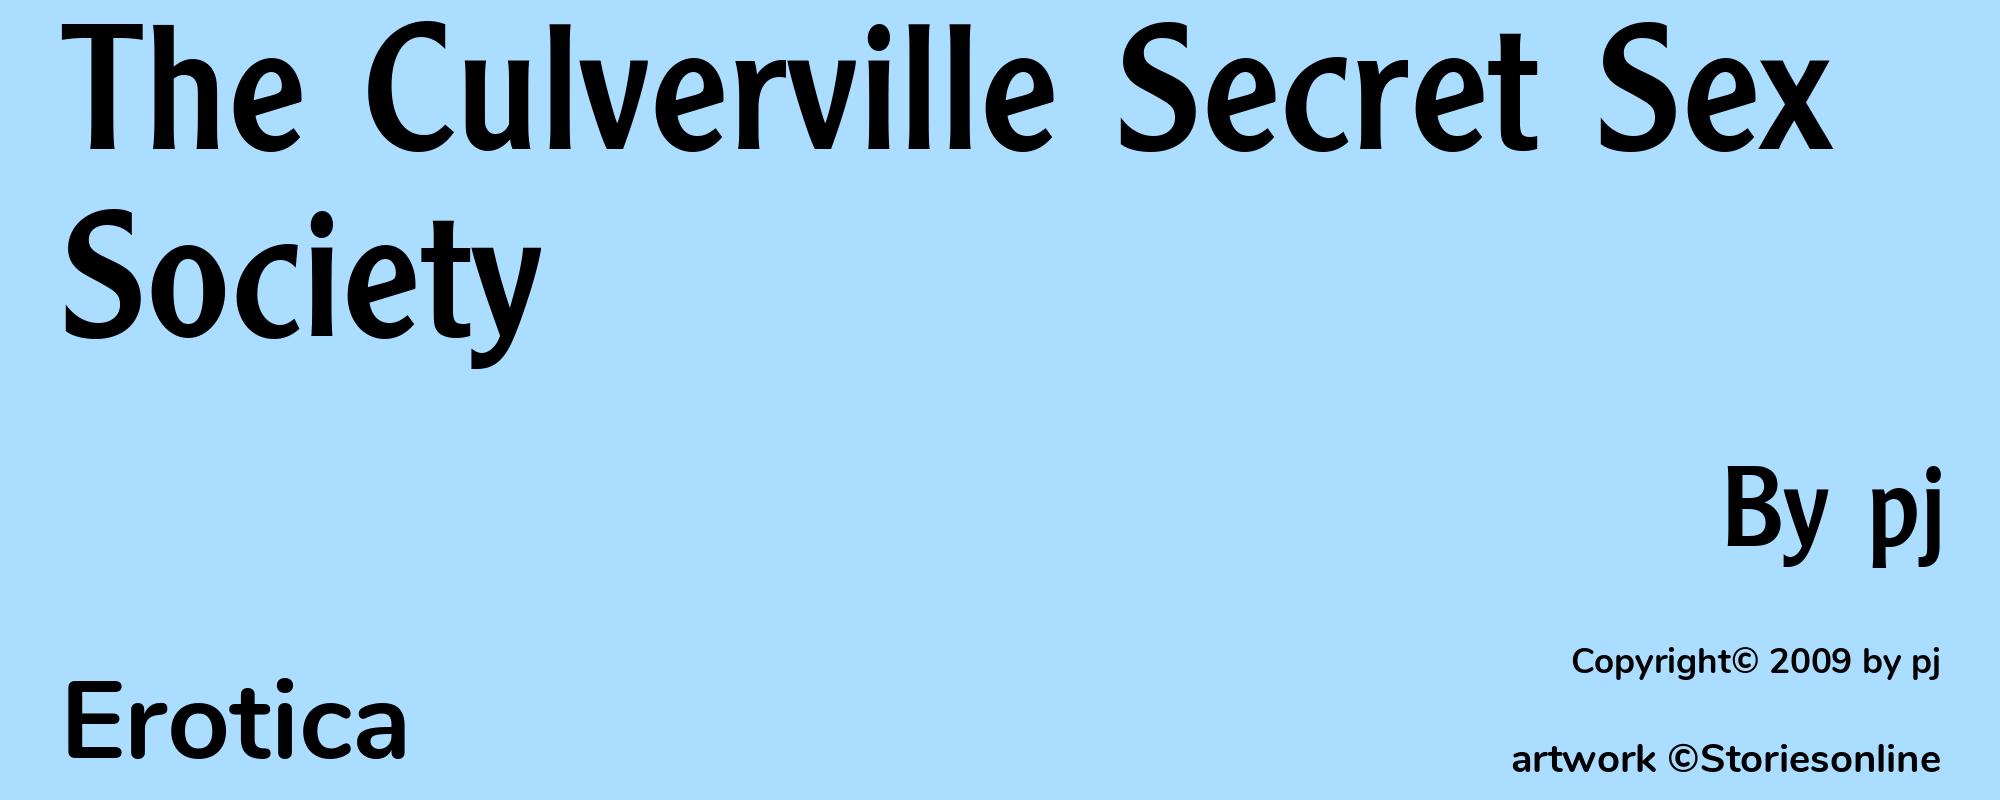 The Culverville Secret Sex Society - Cover